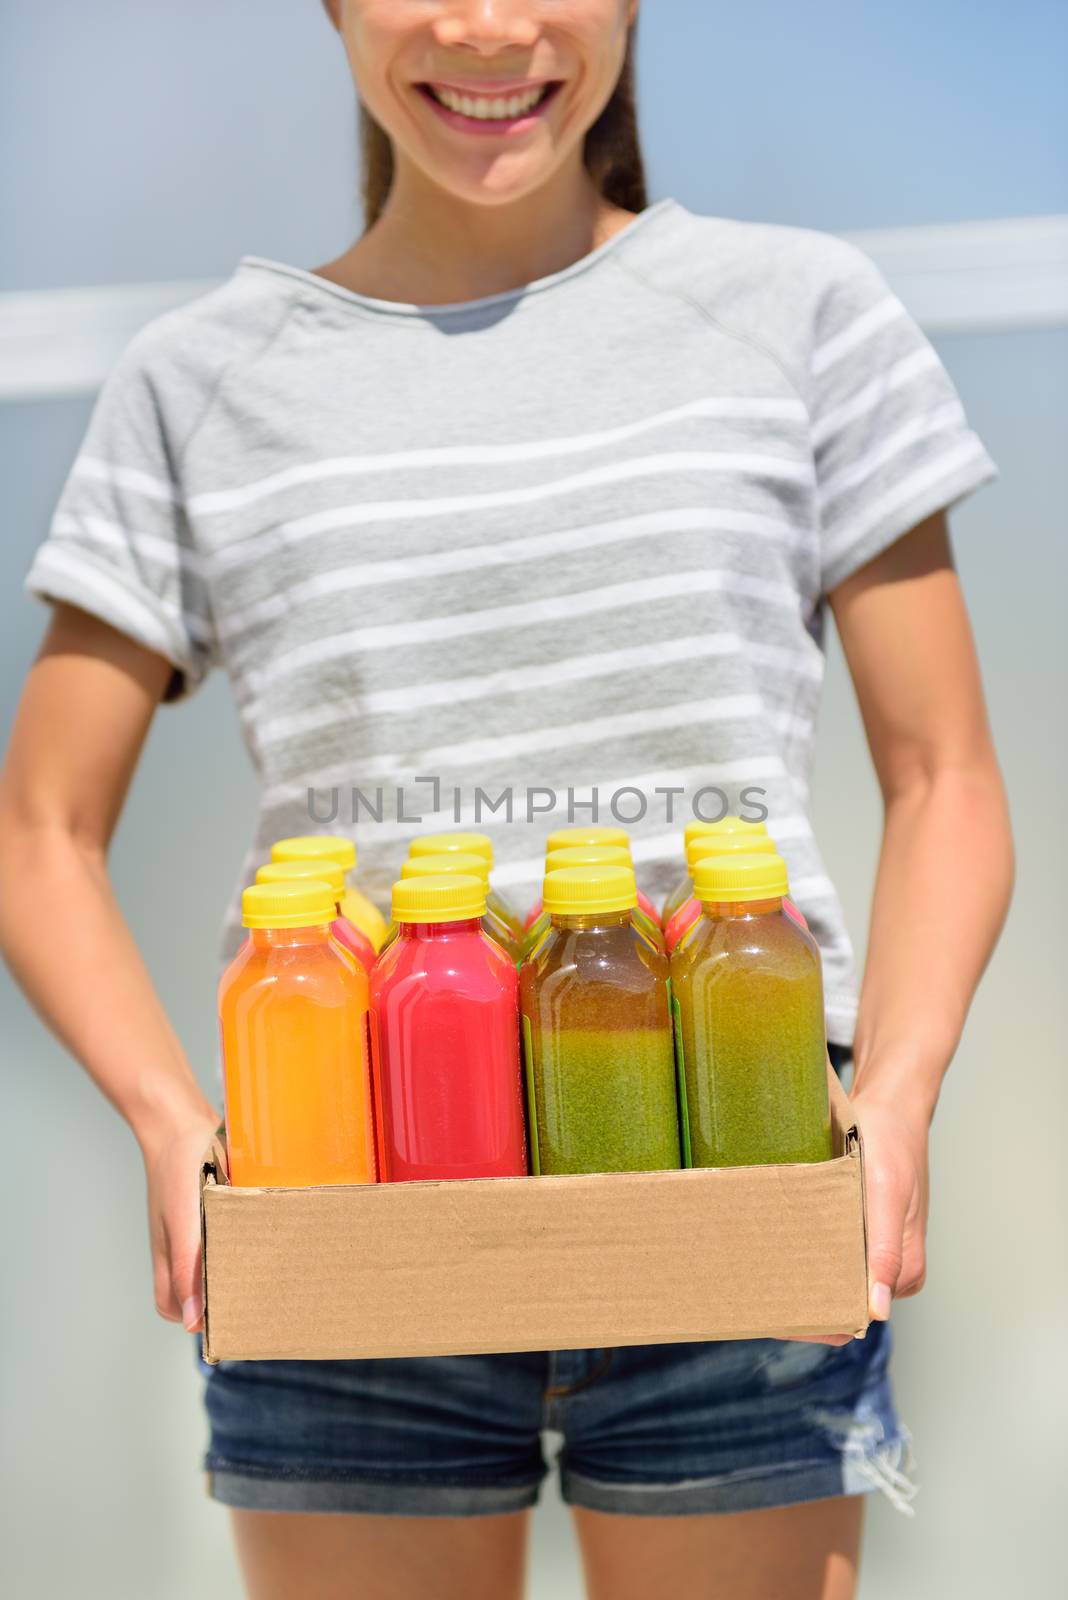 Juice detox - cleanse diet with juicing raw and organic fruits and veggies. Fresh juices delivery woman with vegetable drinks. Young girl carrying a box of juice bottles.